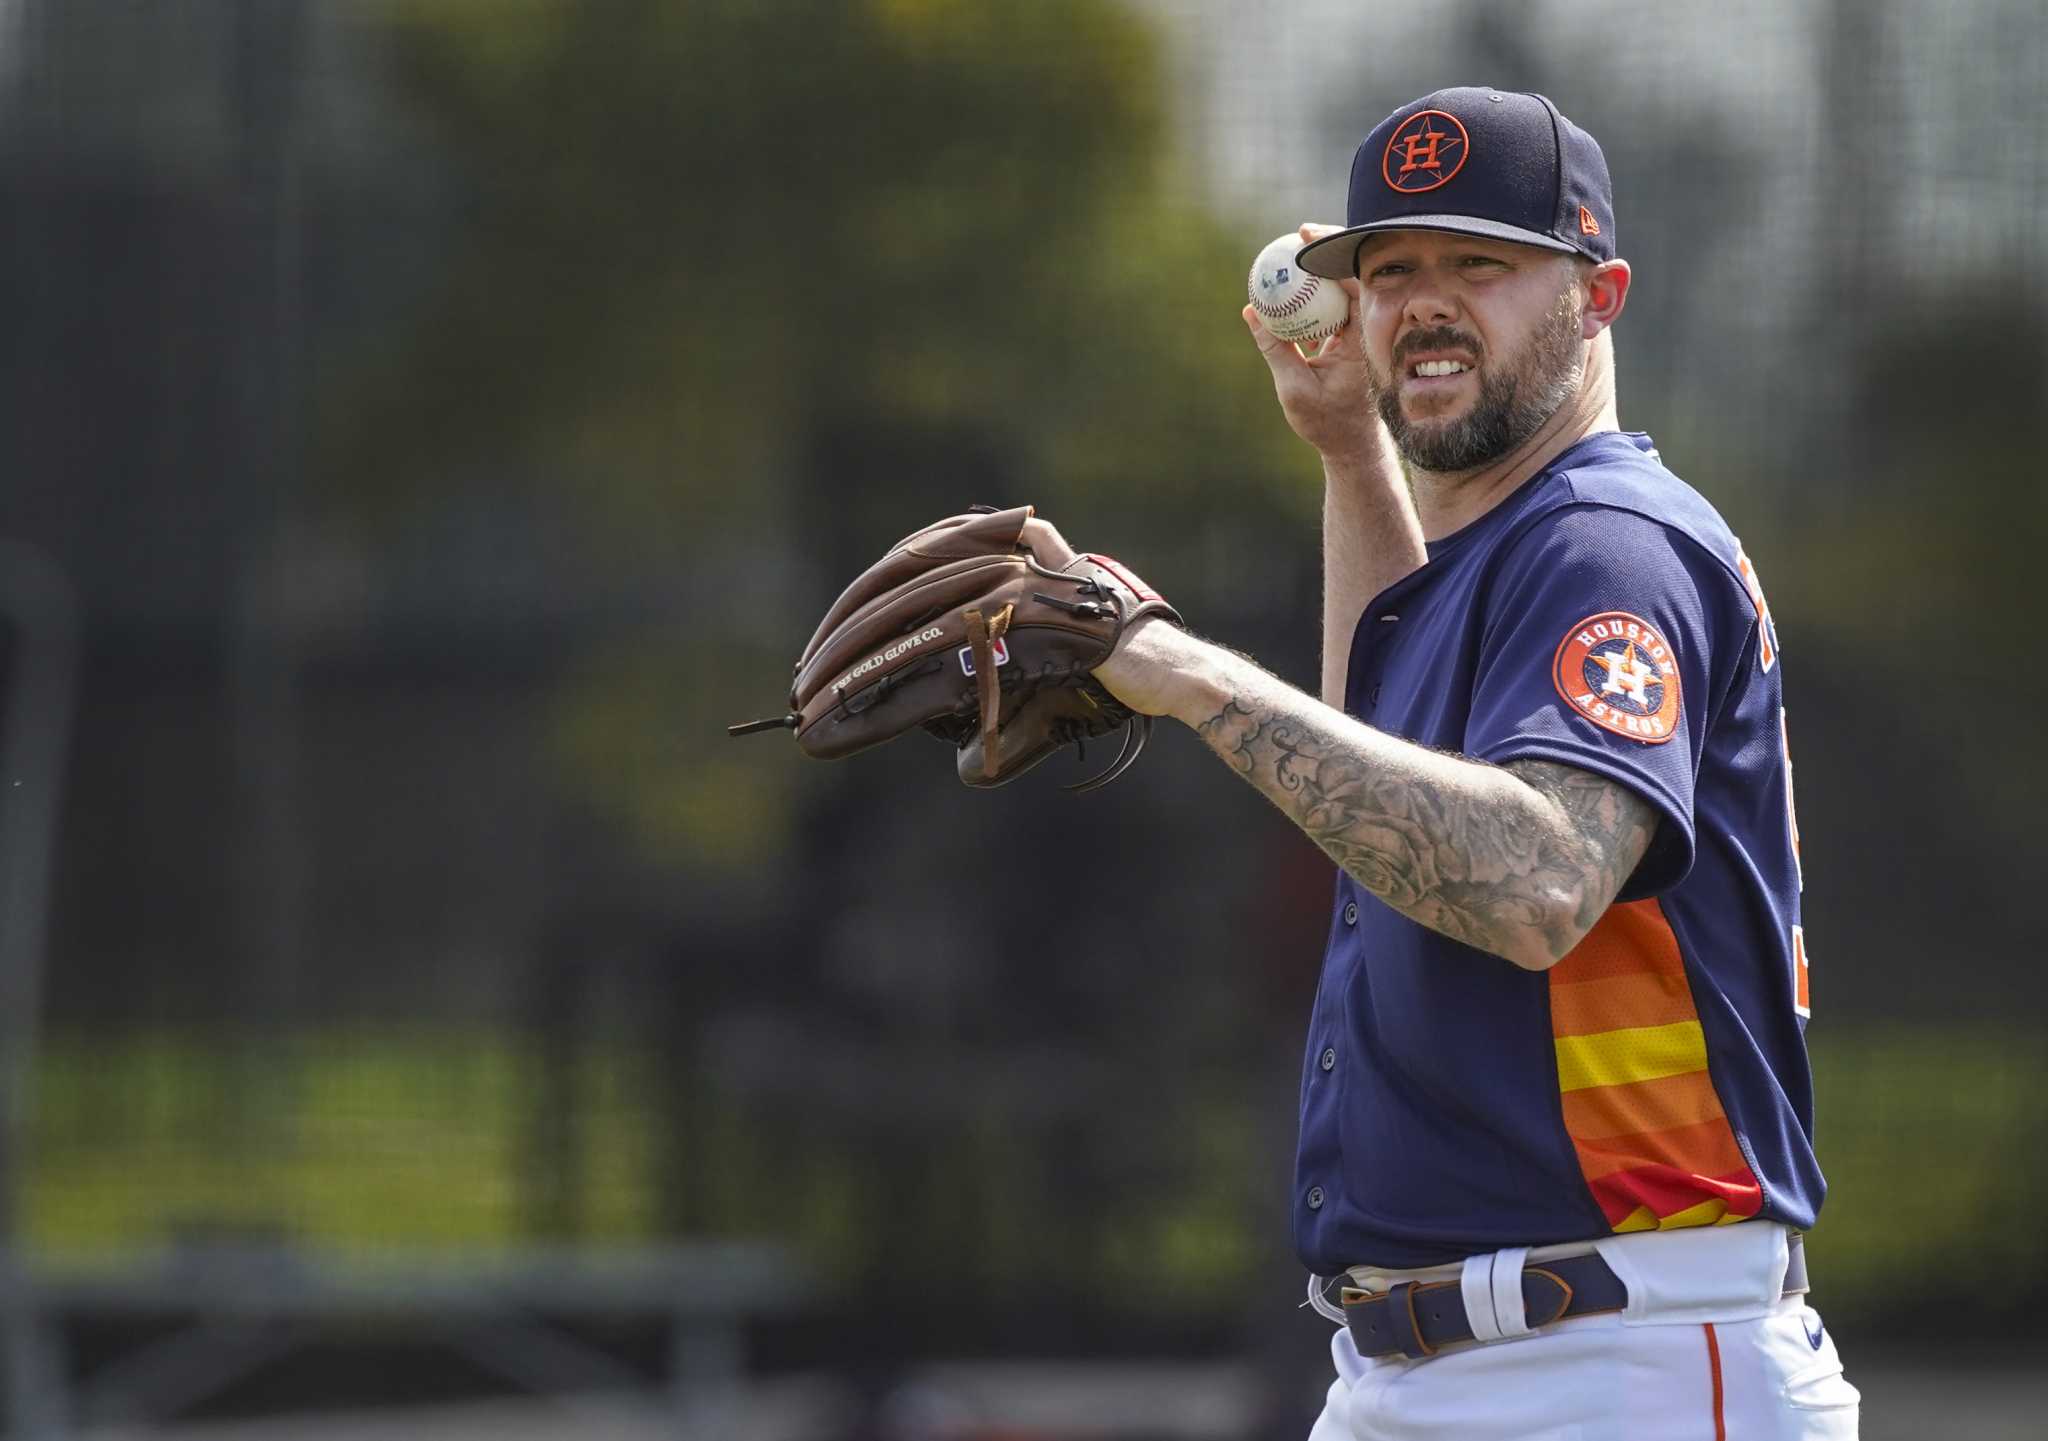 Now more than ever: The Astros need the “old” Ryan Pressly - The